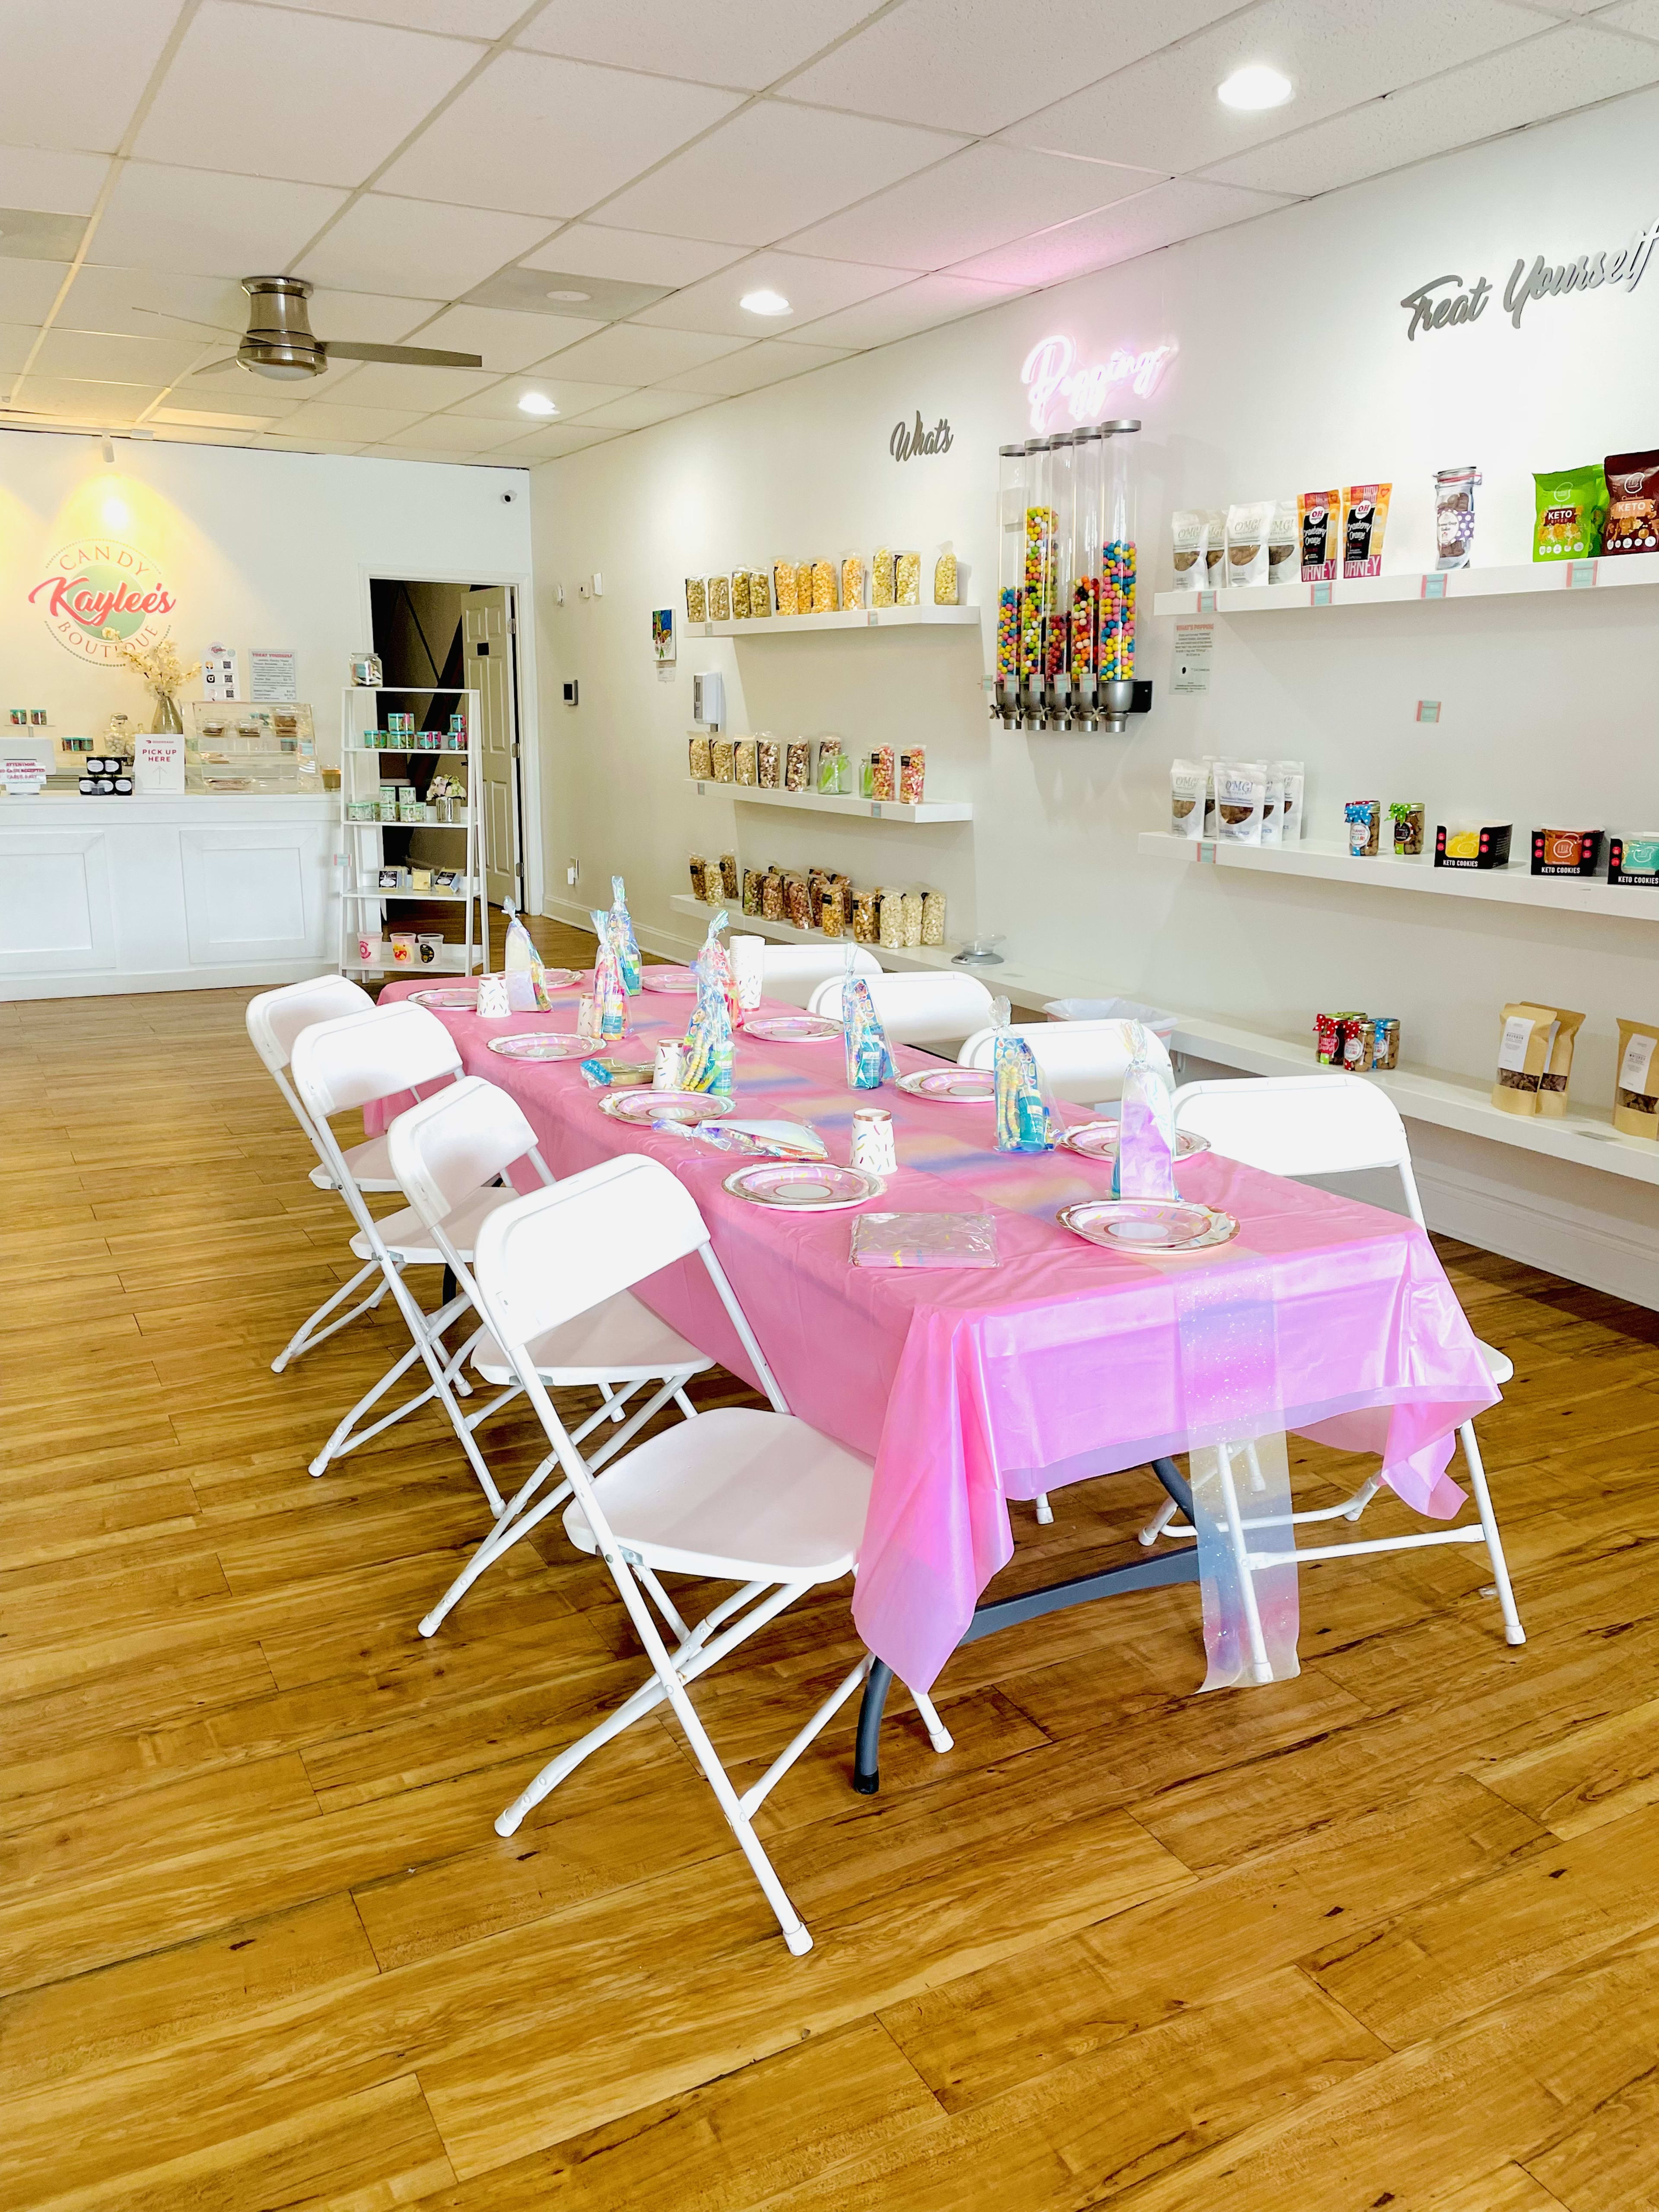 A candy-themed birthday party room with a pink table and white chairs.